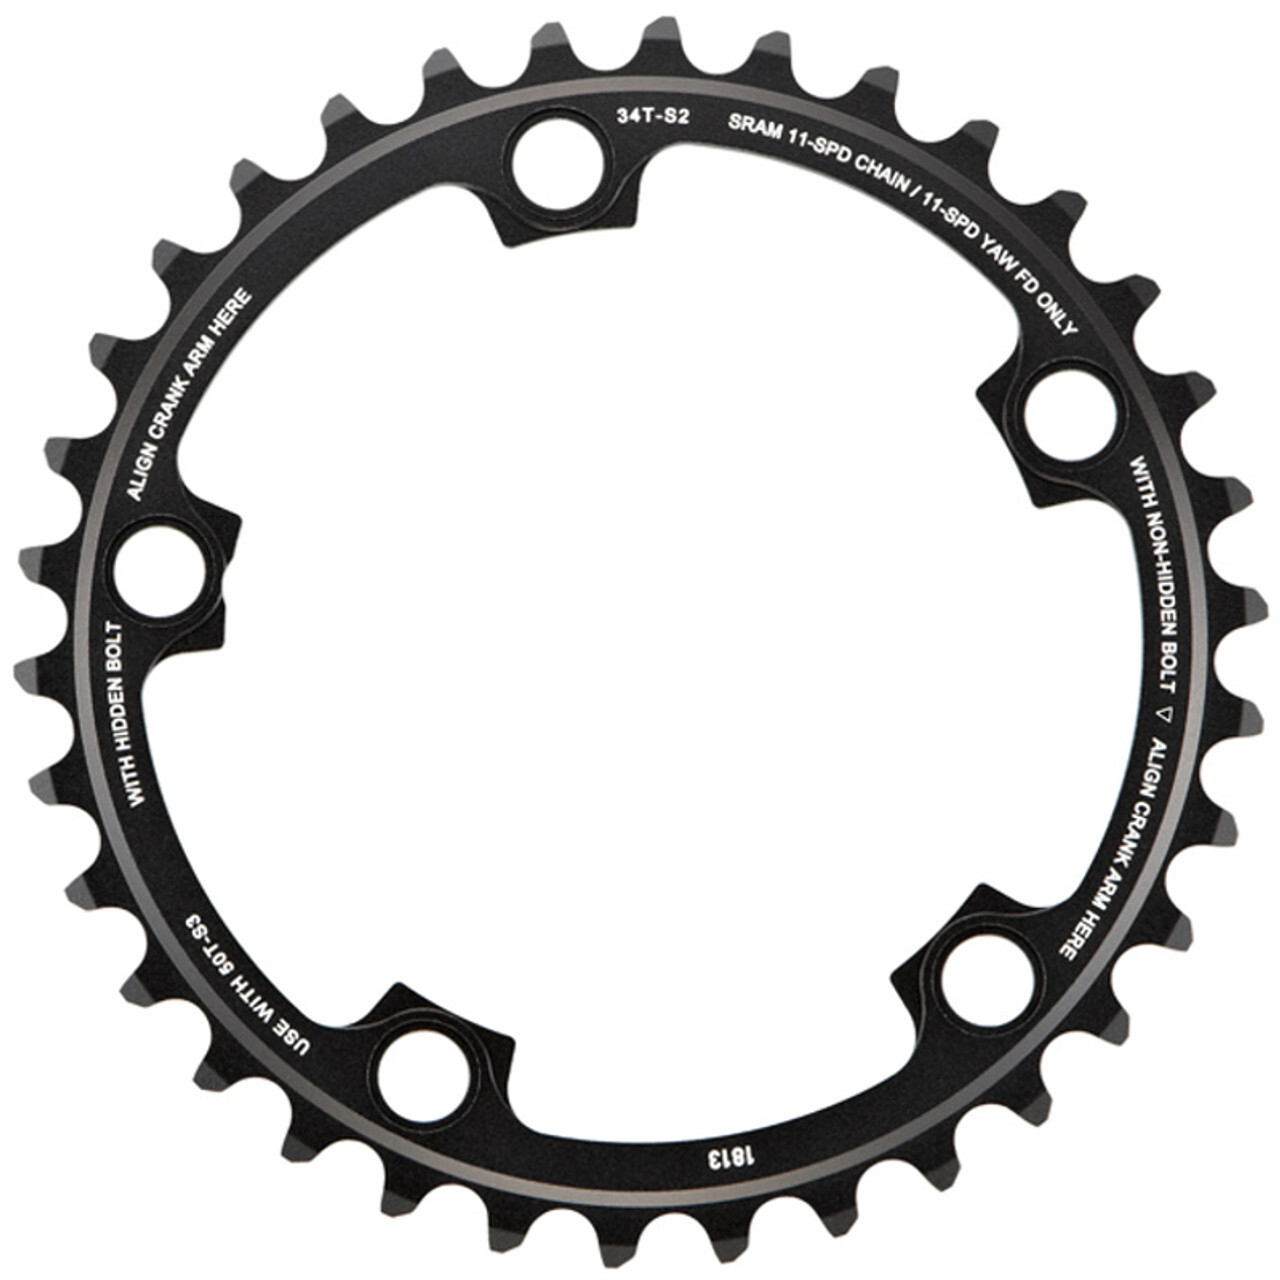 Chainring SRAM Red 11-Speed 34T Yaw Chainring SRAM Red 11-Speed 34T Yaw